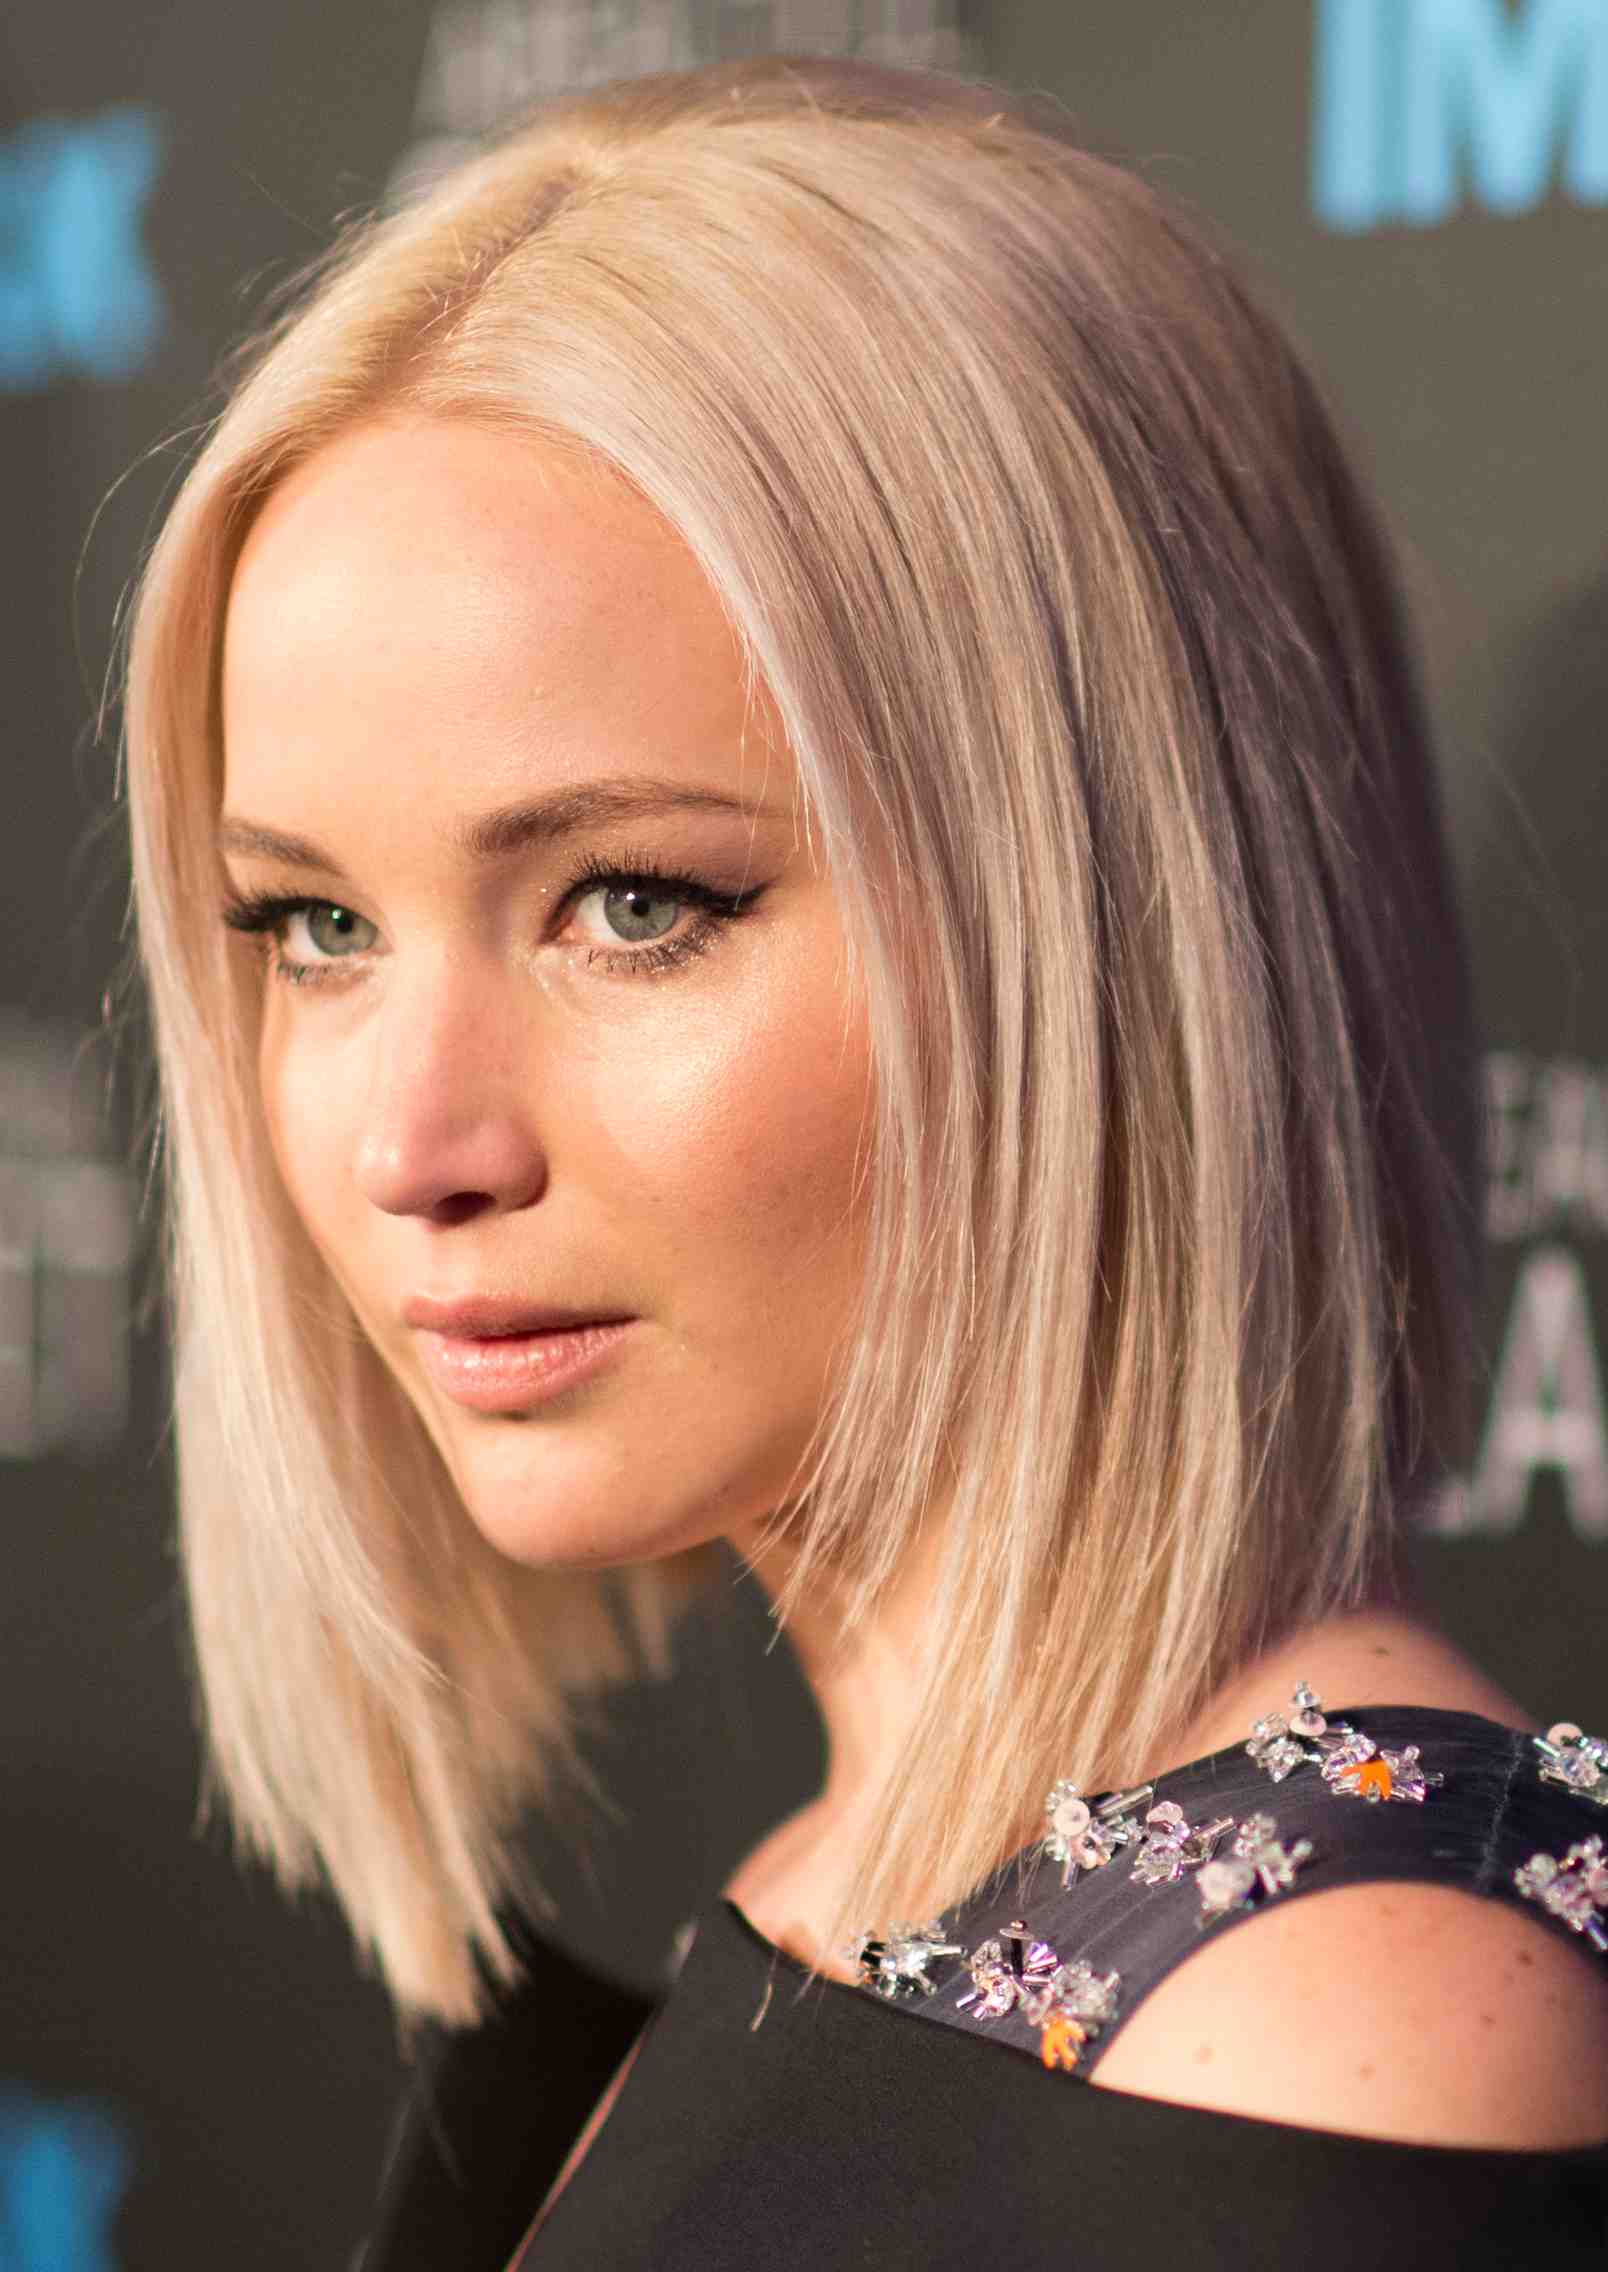 Click for candy for your eyes! Explore Jennifer Lawrence's sex scenes that sizzle, simmer, and leave audiences thirsting for more. From subtle dances to spy games, we cover it all!